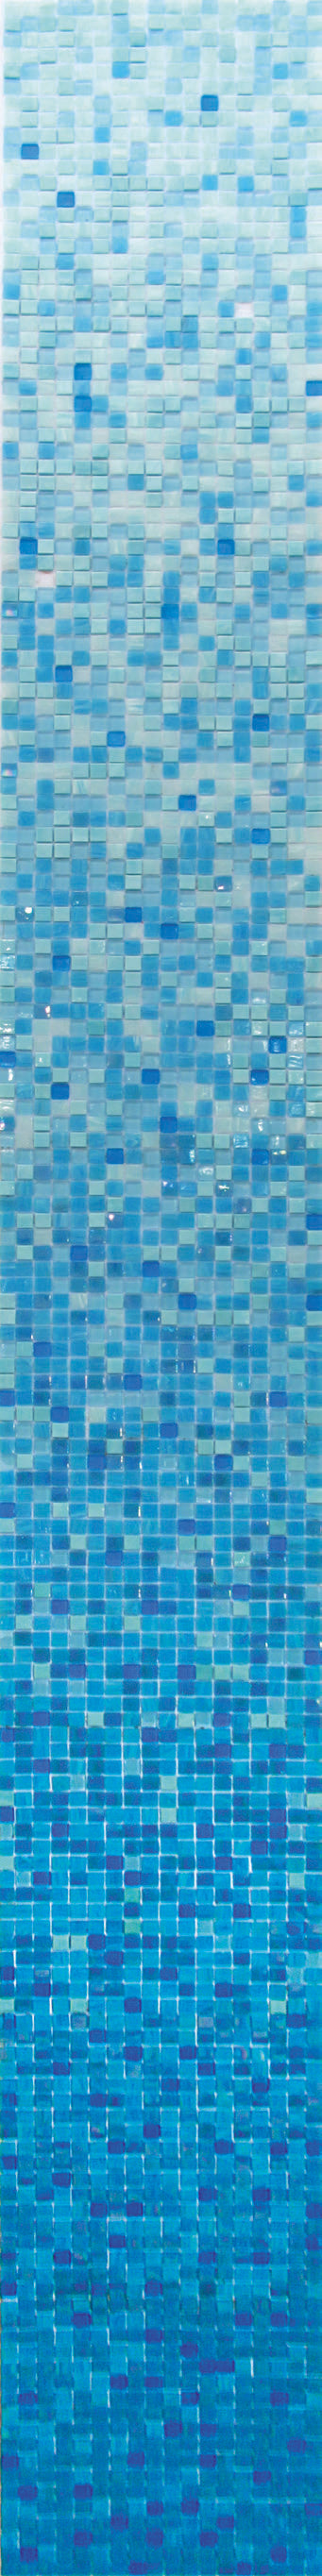 mir alma gradients 0_6 inch de 39 wall and floor mosaic distributed by surface group natural materials